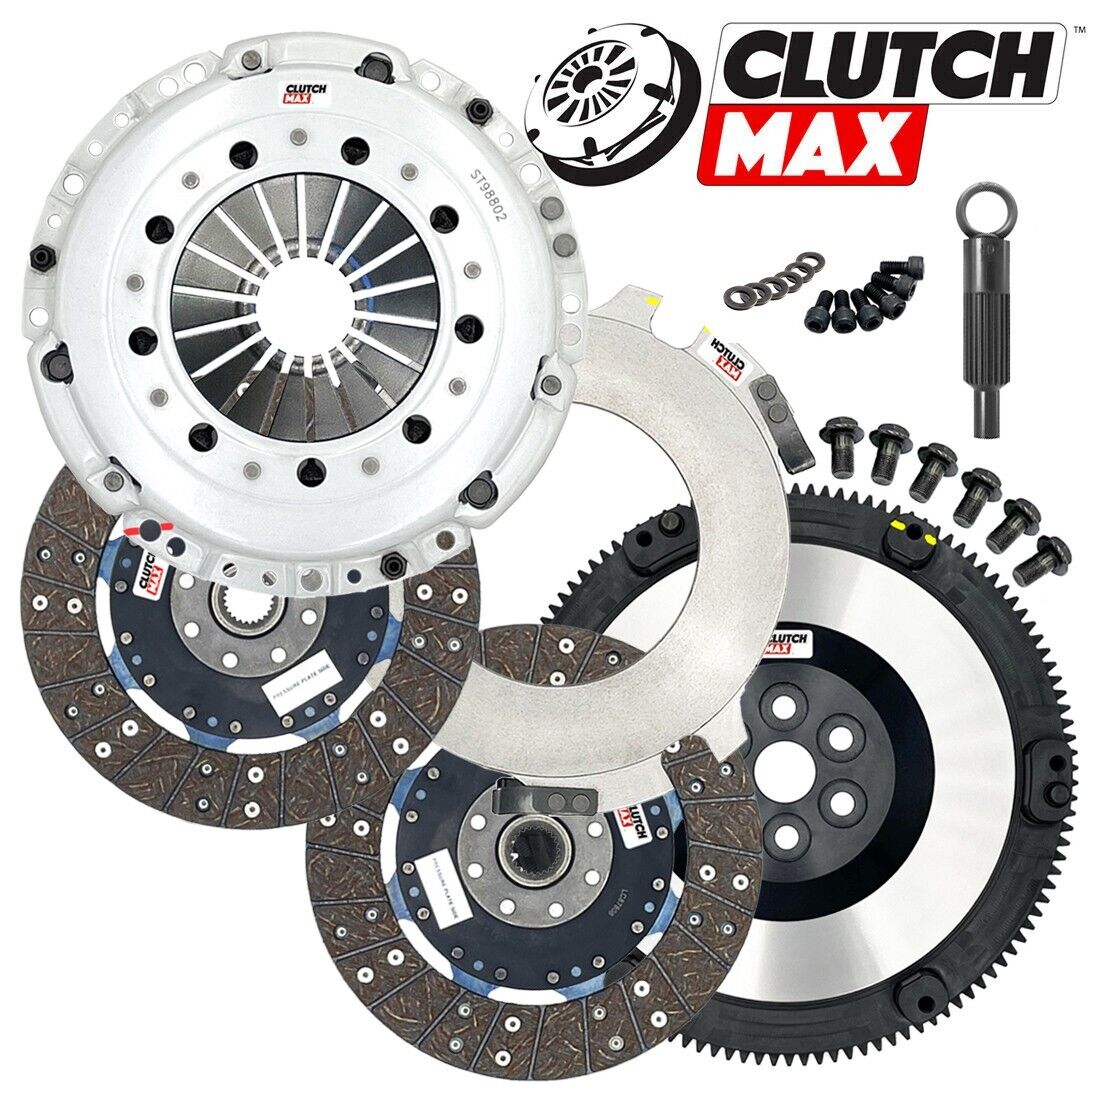 CM 700HP TWIN-PLATE CLUTCH FLYWHEEL KIT SYSTEM fits 2015+ FORD MUSTANG ECOBOOST